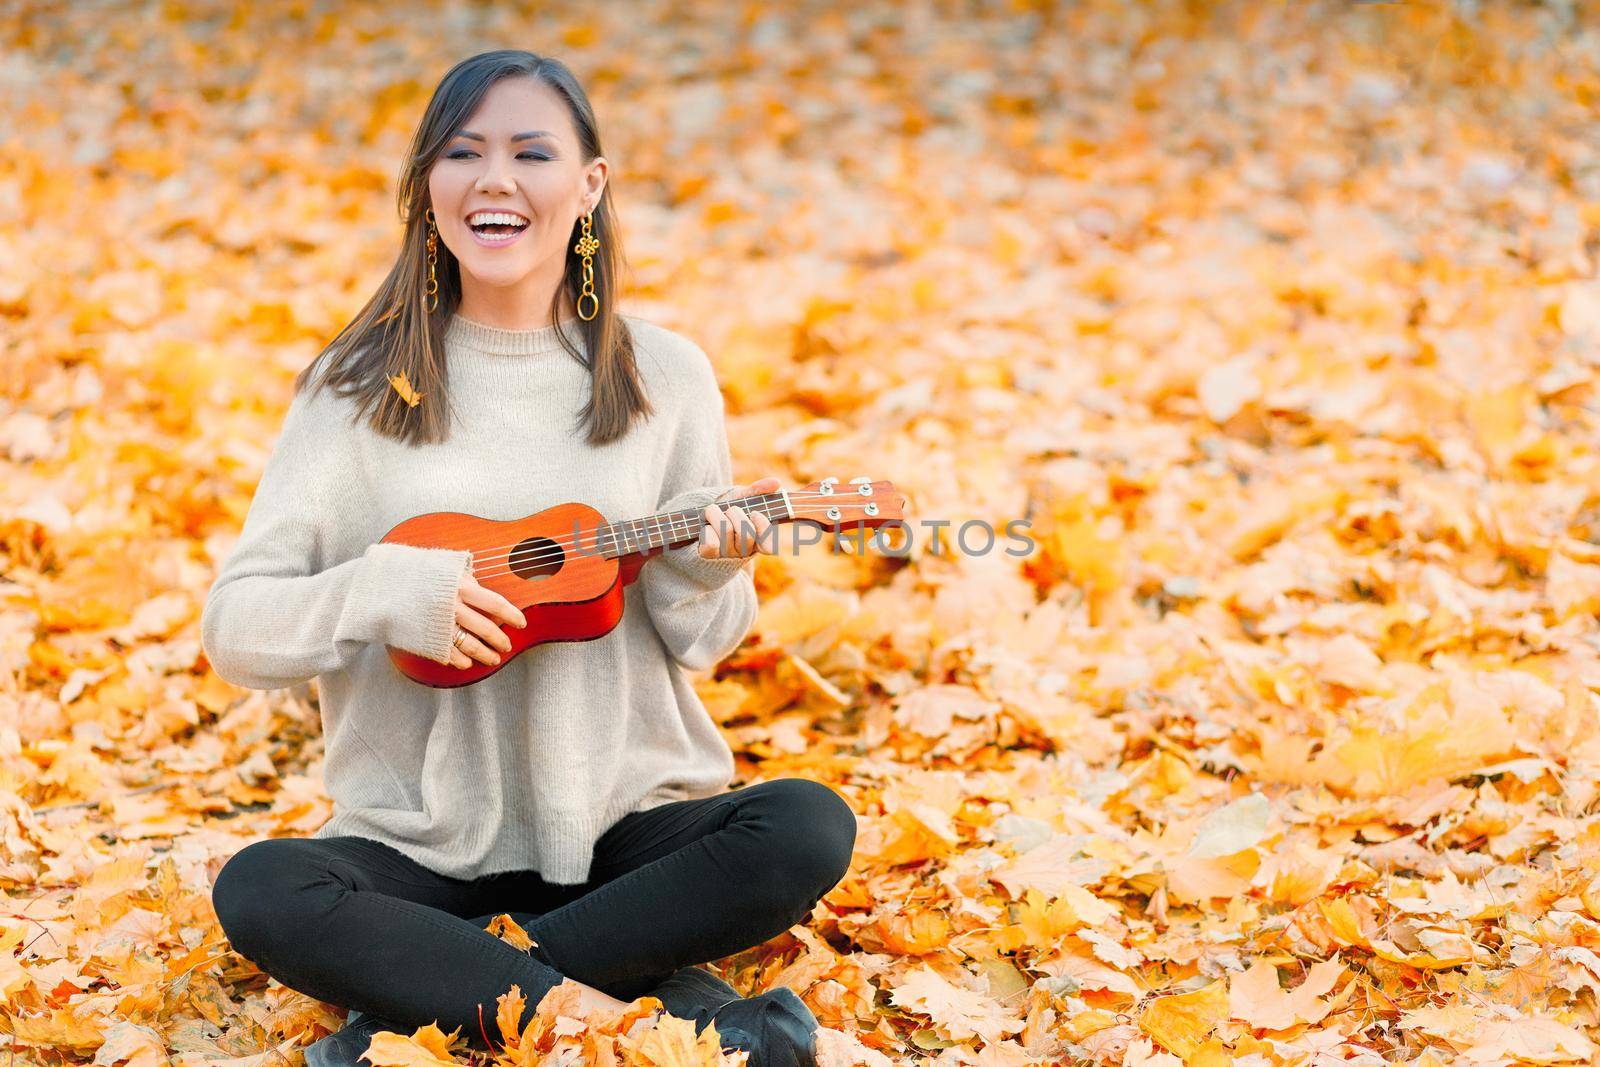 Young cheerful asian woman playing ukulele in autumn park on fallen leaves.